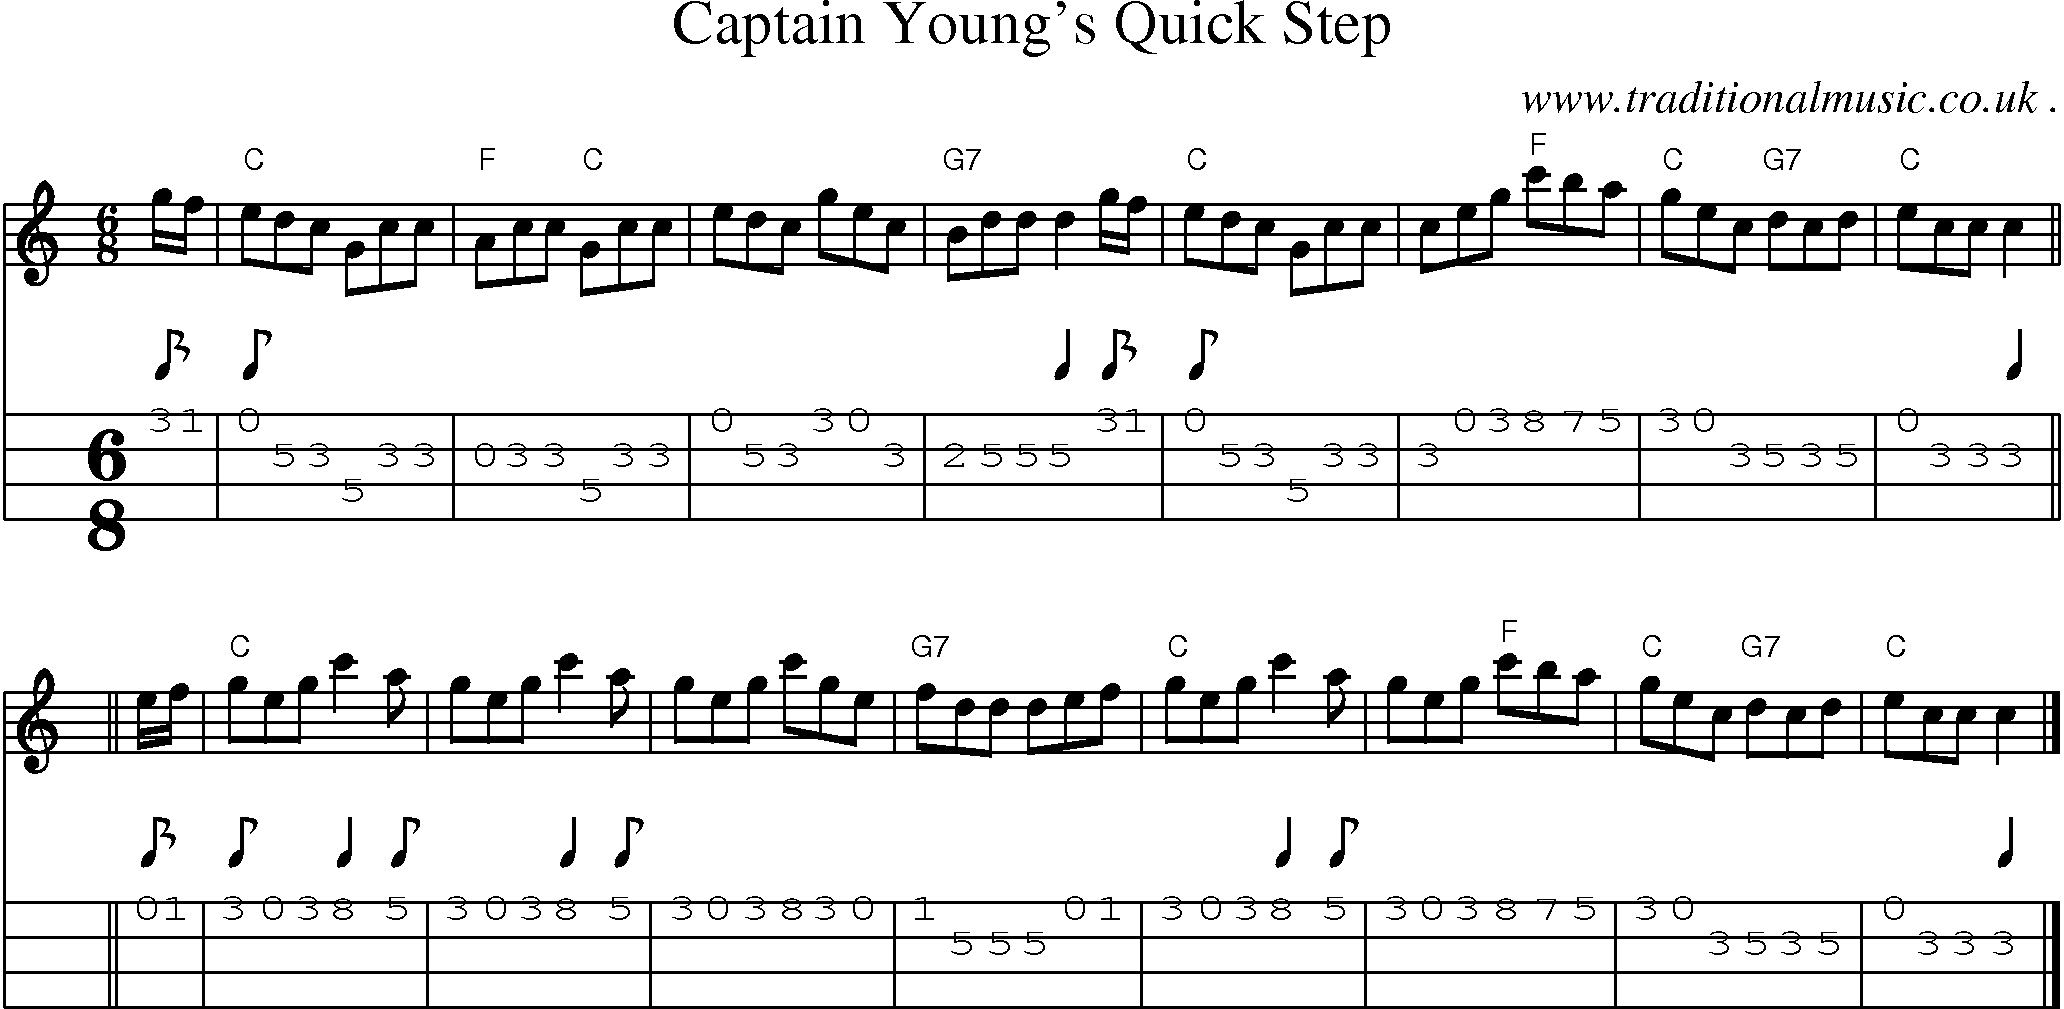 Sheet-music  score, Chords and Mandolin Tabs for Captain Youngs Quick Step